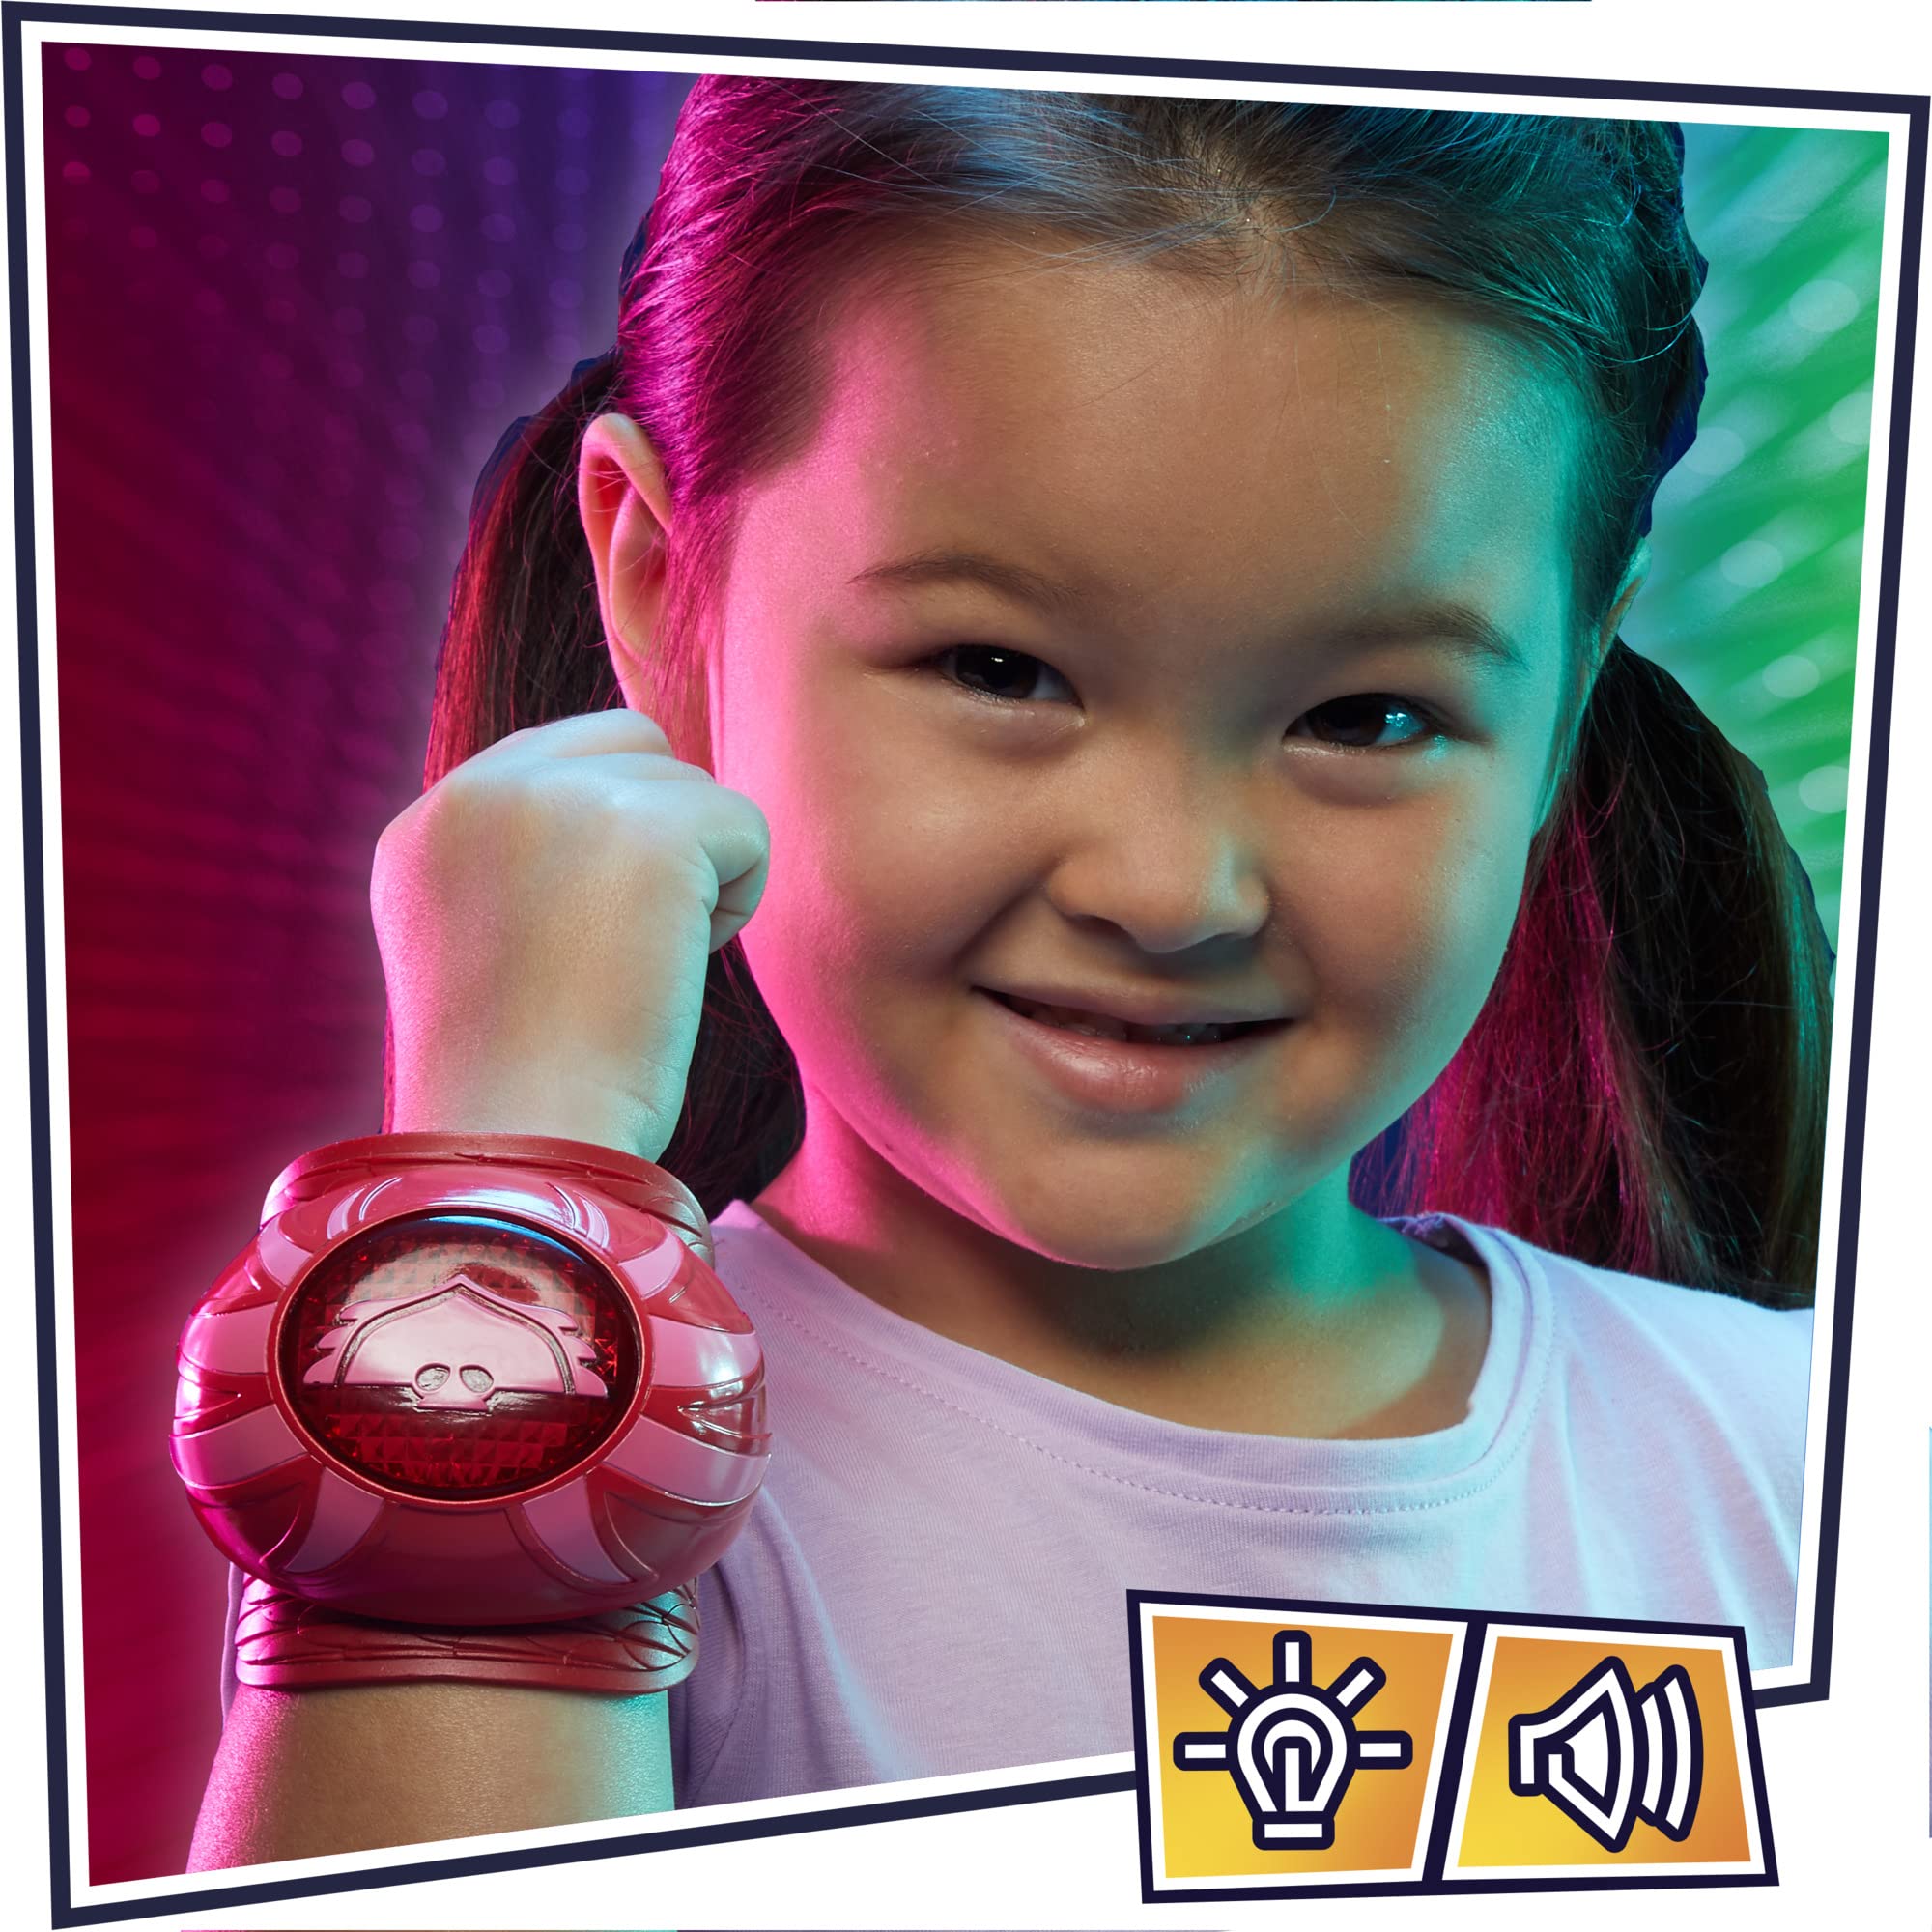 PJ-Masks Owlette Power Wristband Preschool Toy, PJ-Masks-Costume Wearable with Lights and Sounds for Kids Ages 3 and Up